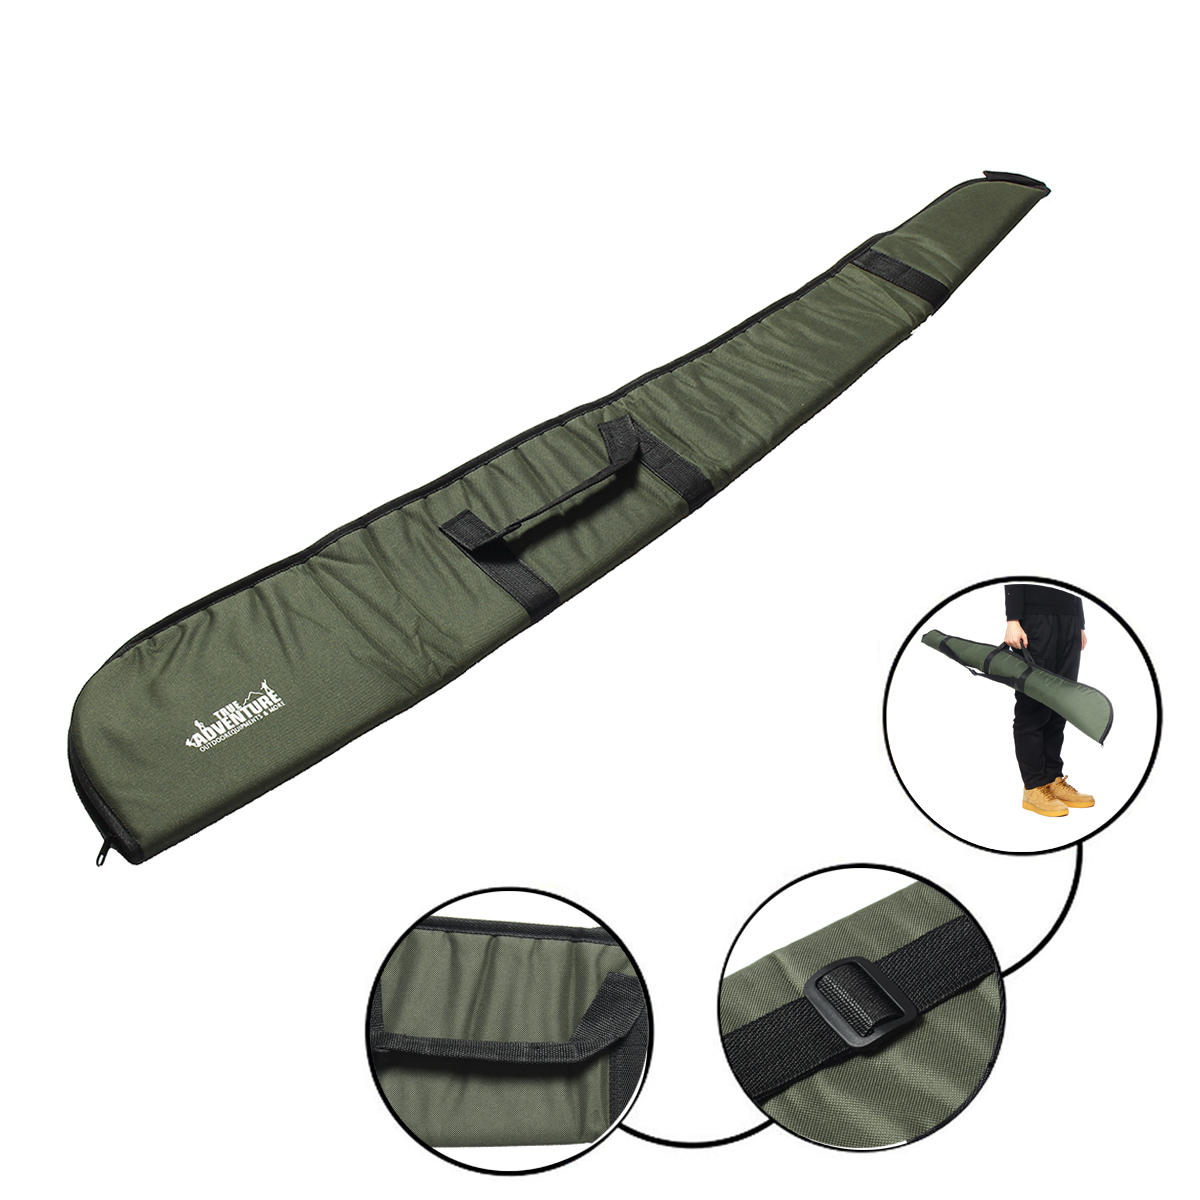 130CM Shockproof Tactical Bag Fishing Rod Storage Bag Outdoor Carry Case Hunting Pad Fishing Bag